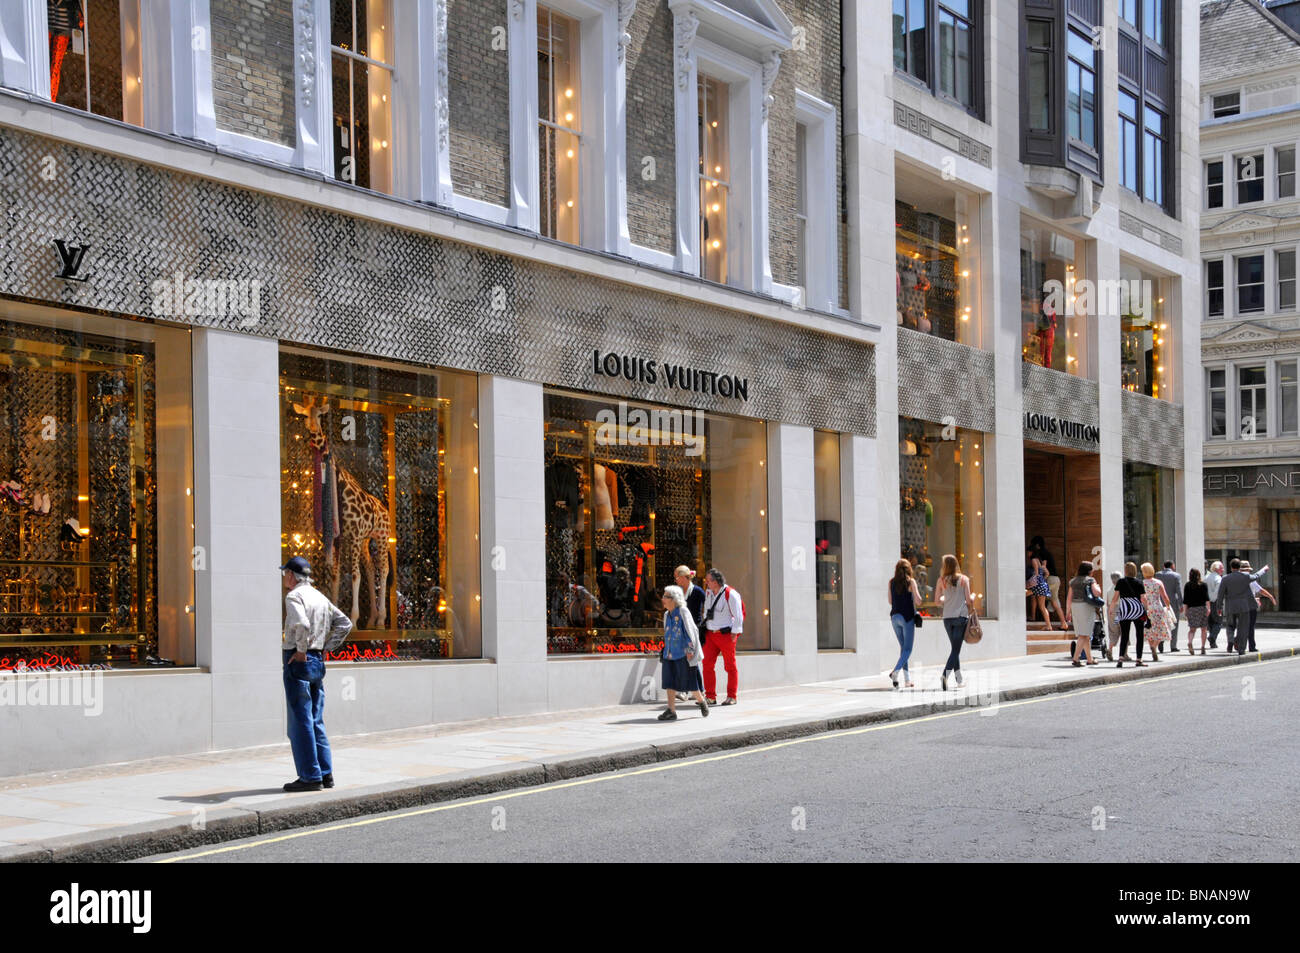 Louis Vuitton store front in London Stock Photo: 30354405 - Alamy